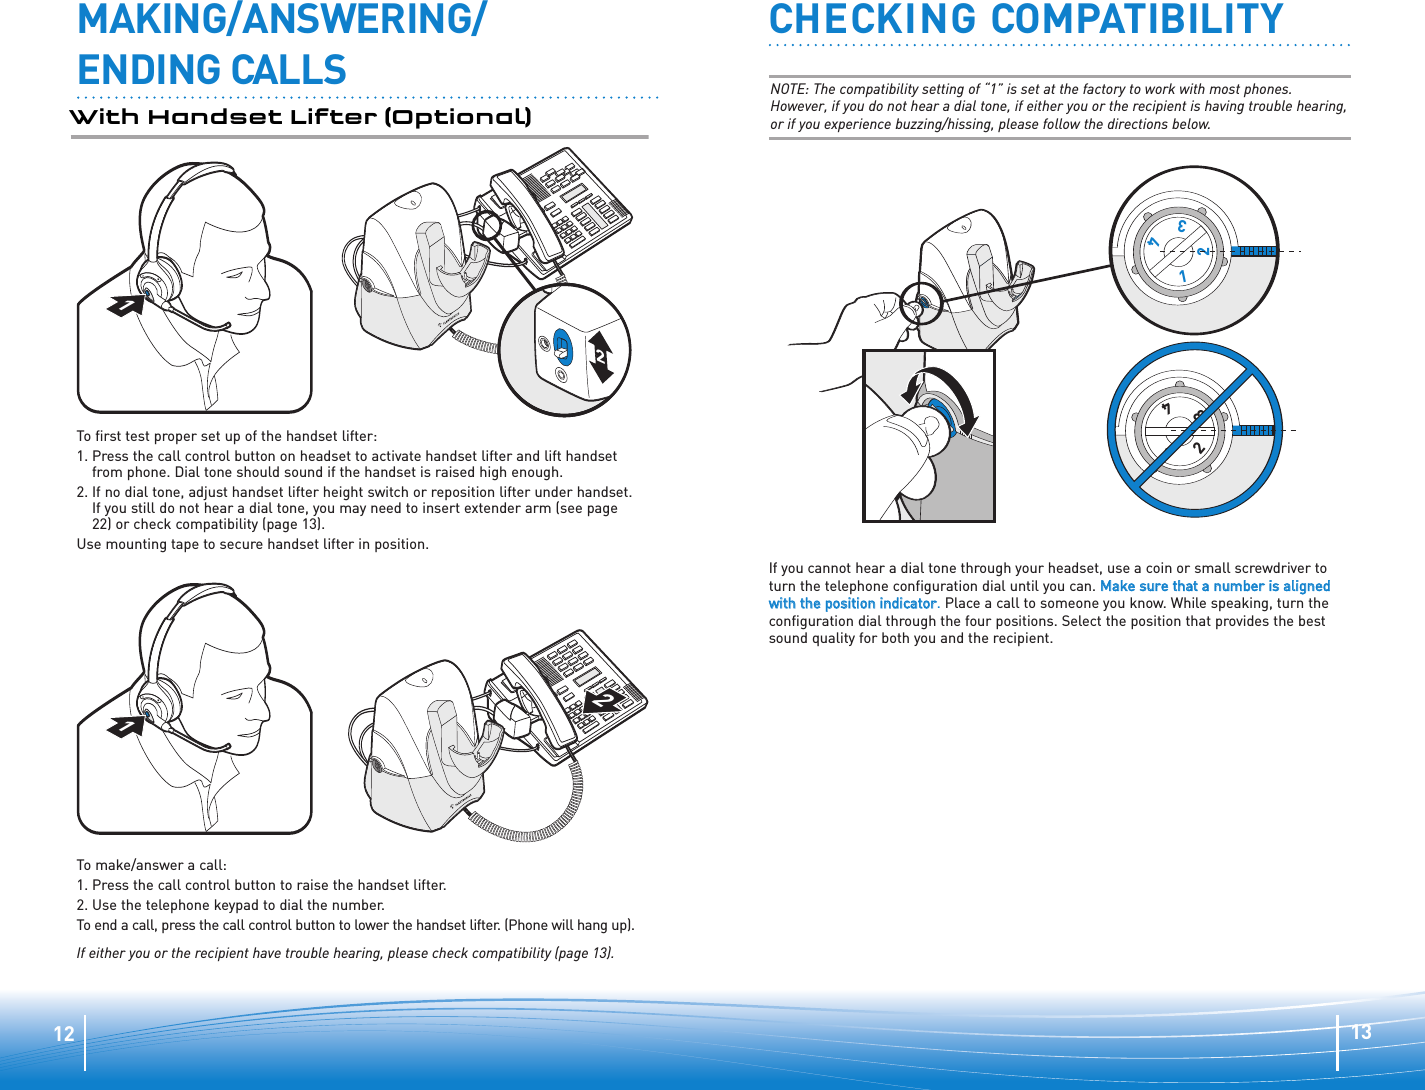 1312CHECKING COMPATIBILITY1         2         3         41         2         3         4If you cannot hear a dial tone through your headset, use a coin or small screwdriver toturn the telephone configuration dial until you can. MMaakkee ssuurree tthhaatt aa nnuummbbeerr iiss aalliiggnneeddwwiitthh tthhee ppoossiittiioonn iinnddiiccaattoorr.Place a call to someone you know. While speaking, turn theconfiguration dial through the four positions. Select the position that provides the bestsound quality for both you and the recipient.NOTE: The compatibility setting of “1” is set at the factory to work with most phones.However, if you do not hear a dial tone, if either you or the recipient is having trouble hearing,or if you experience buzzing/hissing, please follow the directions below.MAKING/ANSWERING/ENDING CALLSWith Handset Lifter (Optional)1122To first test proper set up of the handset lifter:1. Press the call control button on headset to activate handset lifter and lift handsetfrom phone. Dial tone should sound if the handset is raised high enough.2. If no dial tone, adjust handset lifter height switch or reposition lifter under handset.If you still do not hear a dial tone, you may need to insert extender arm (see page22) or check compatibility (page 13).Use mounting tape to secure handset lifter in position.To make/answer a call:1. Press the call control button to raise the handset lifter.2. Use the telephone keypad to dial the number.To end a call, press the call control button to lower the handset lifter. (Phone will hang up).If either you or the recipient have trouble hearing, please check compatibility (page 13).